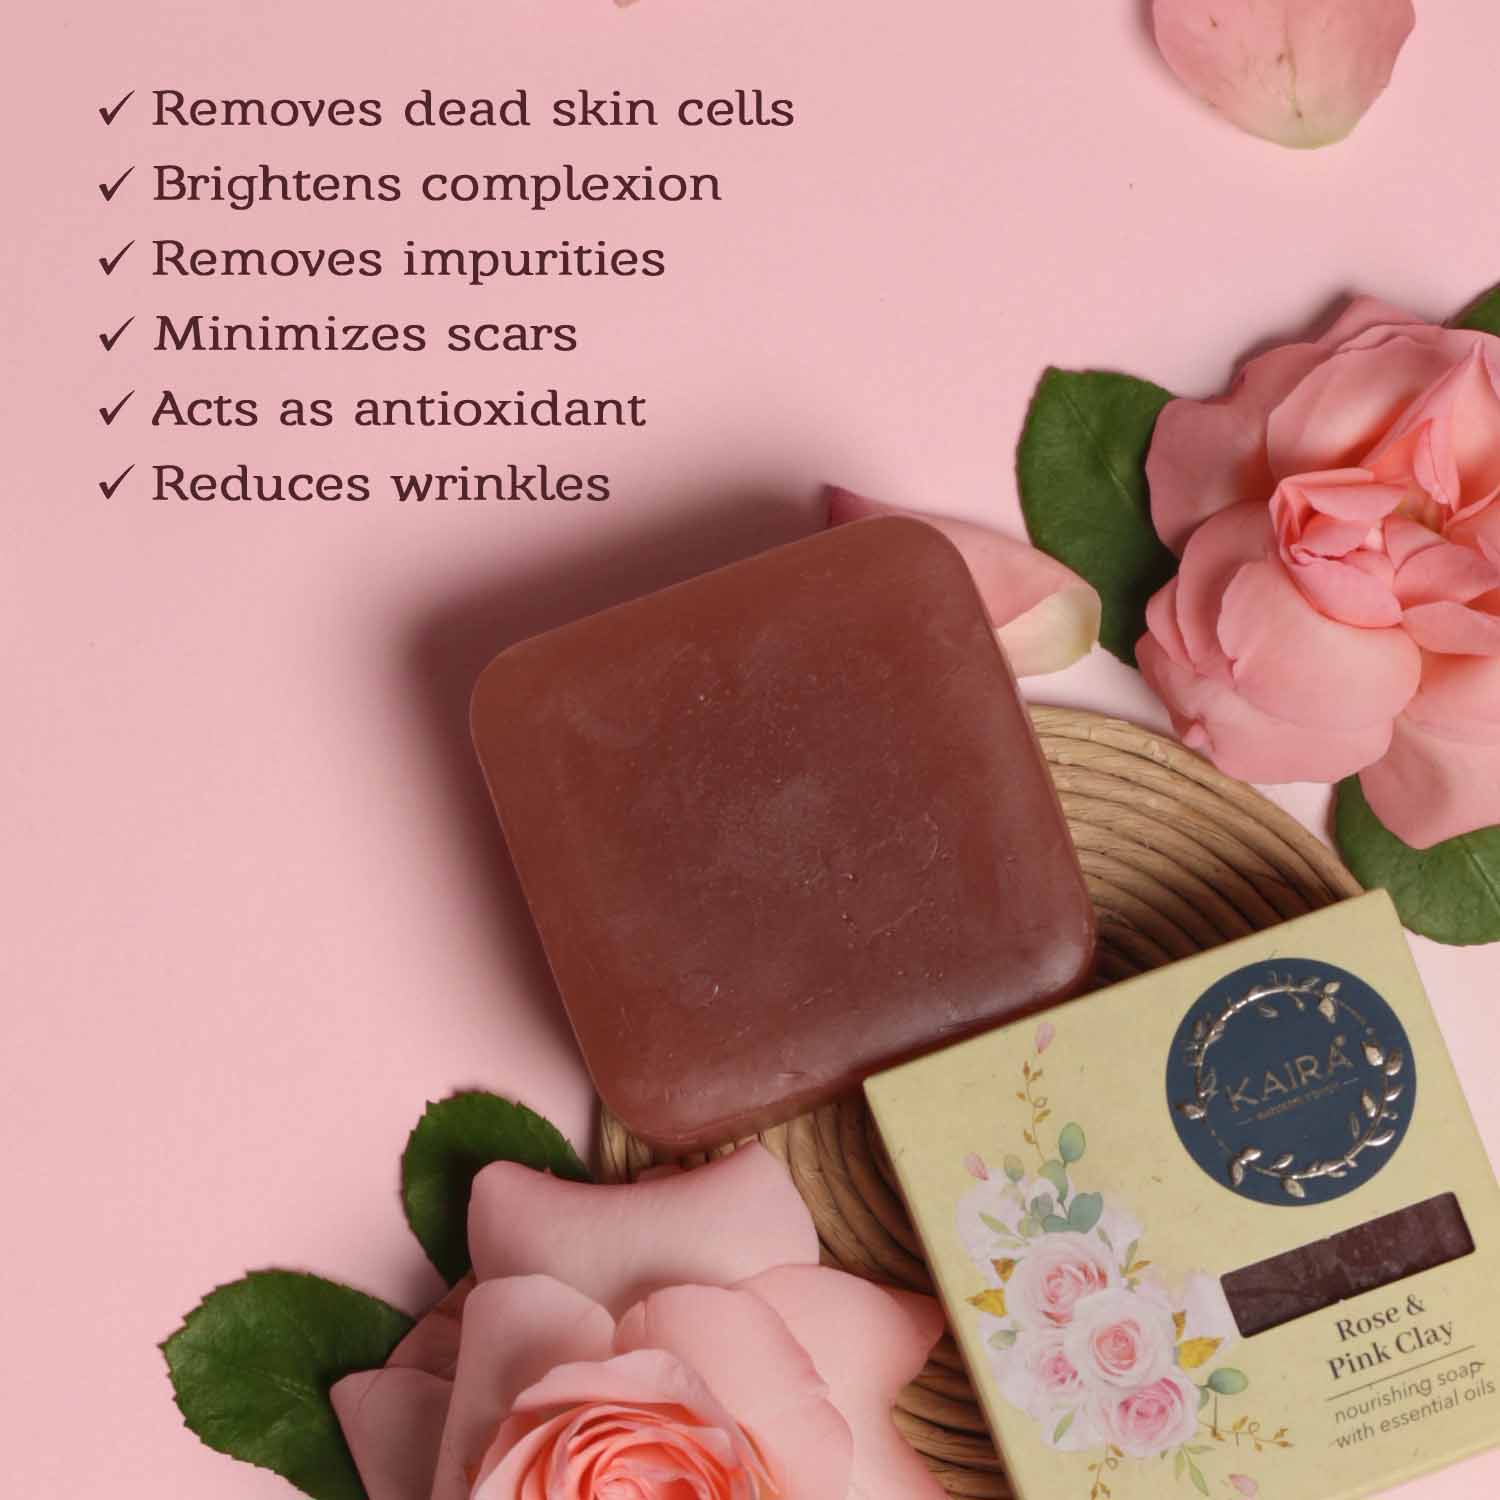 Rose &amp; Pink Clay Soap for Clean &amp; Soft Skin